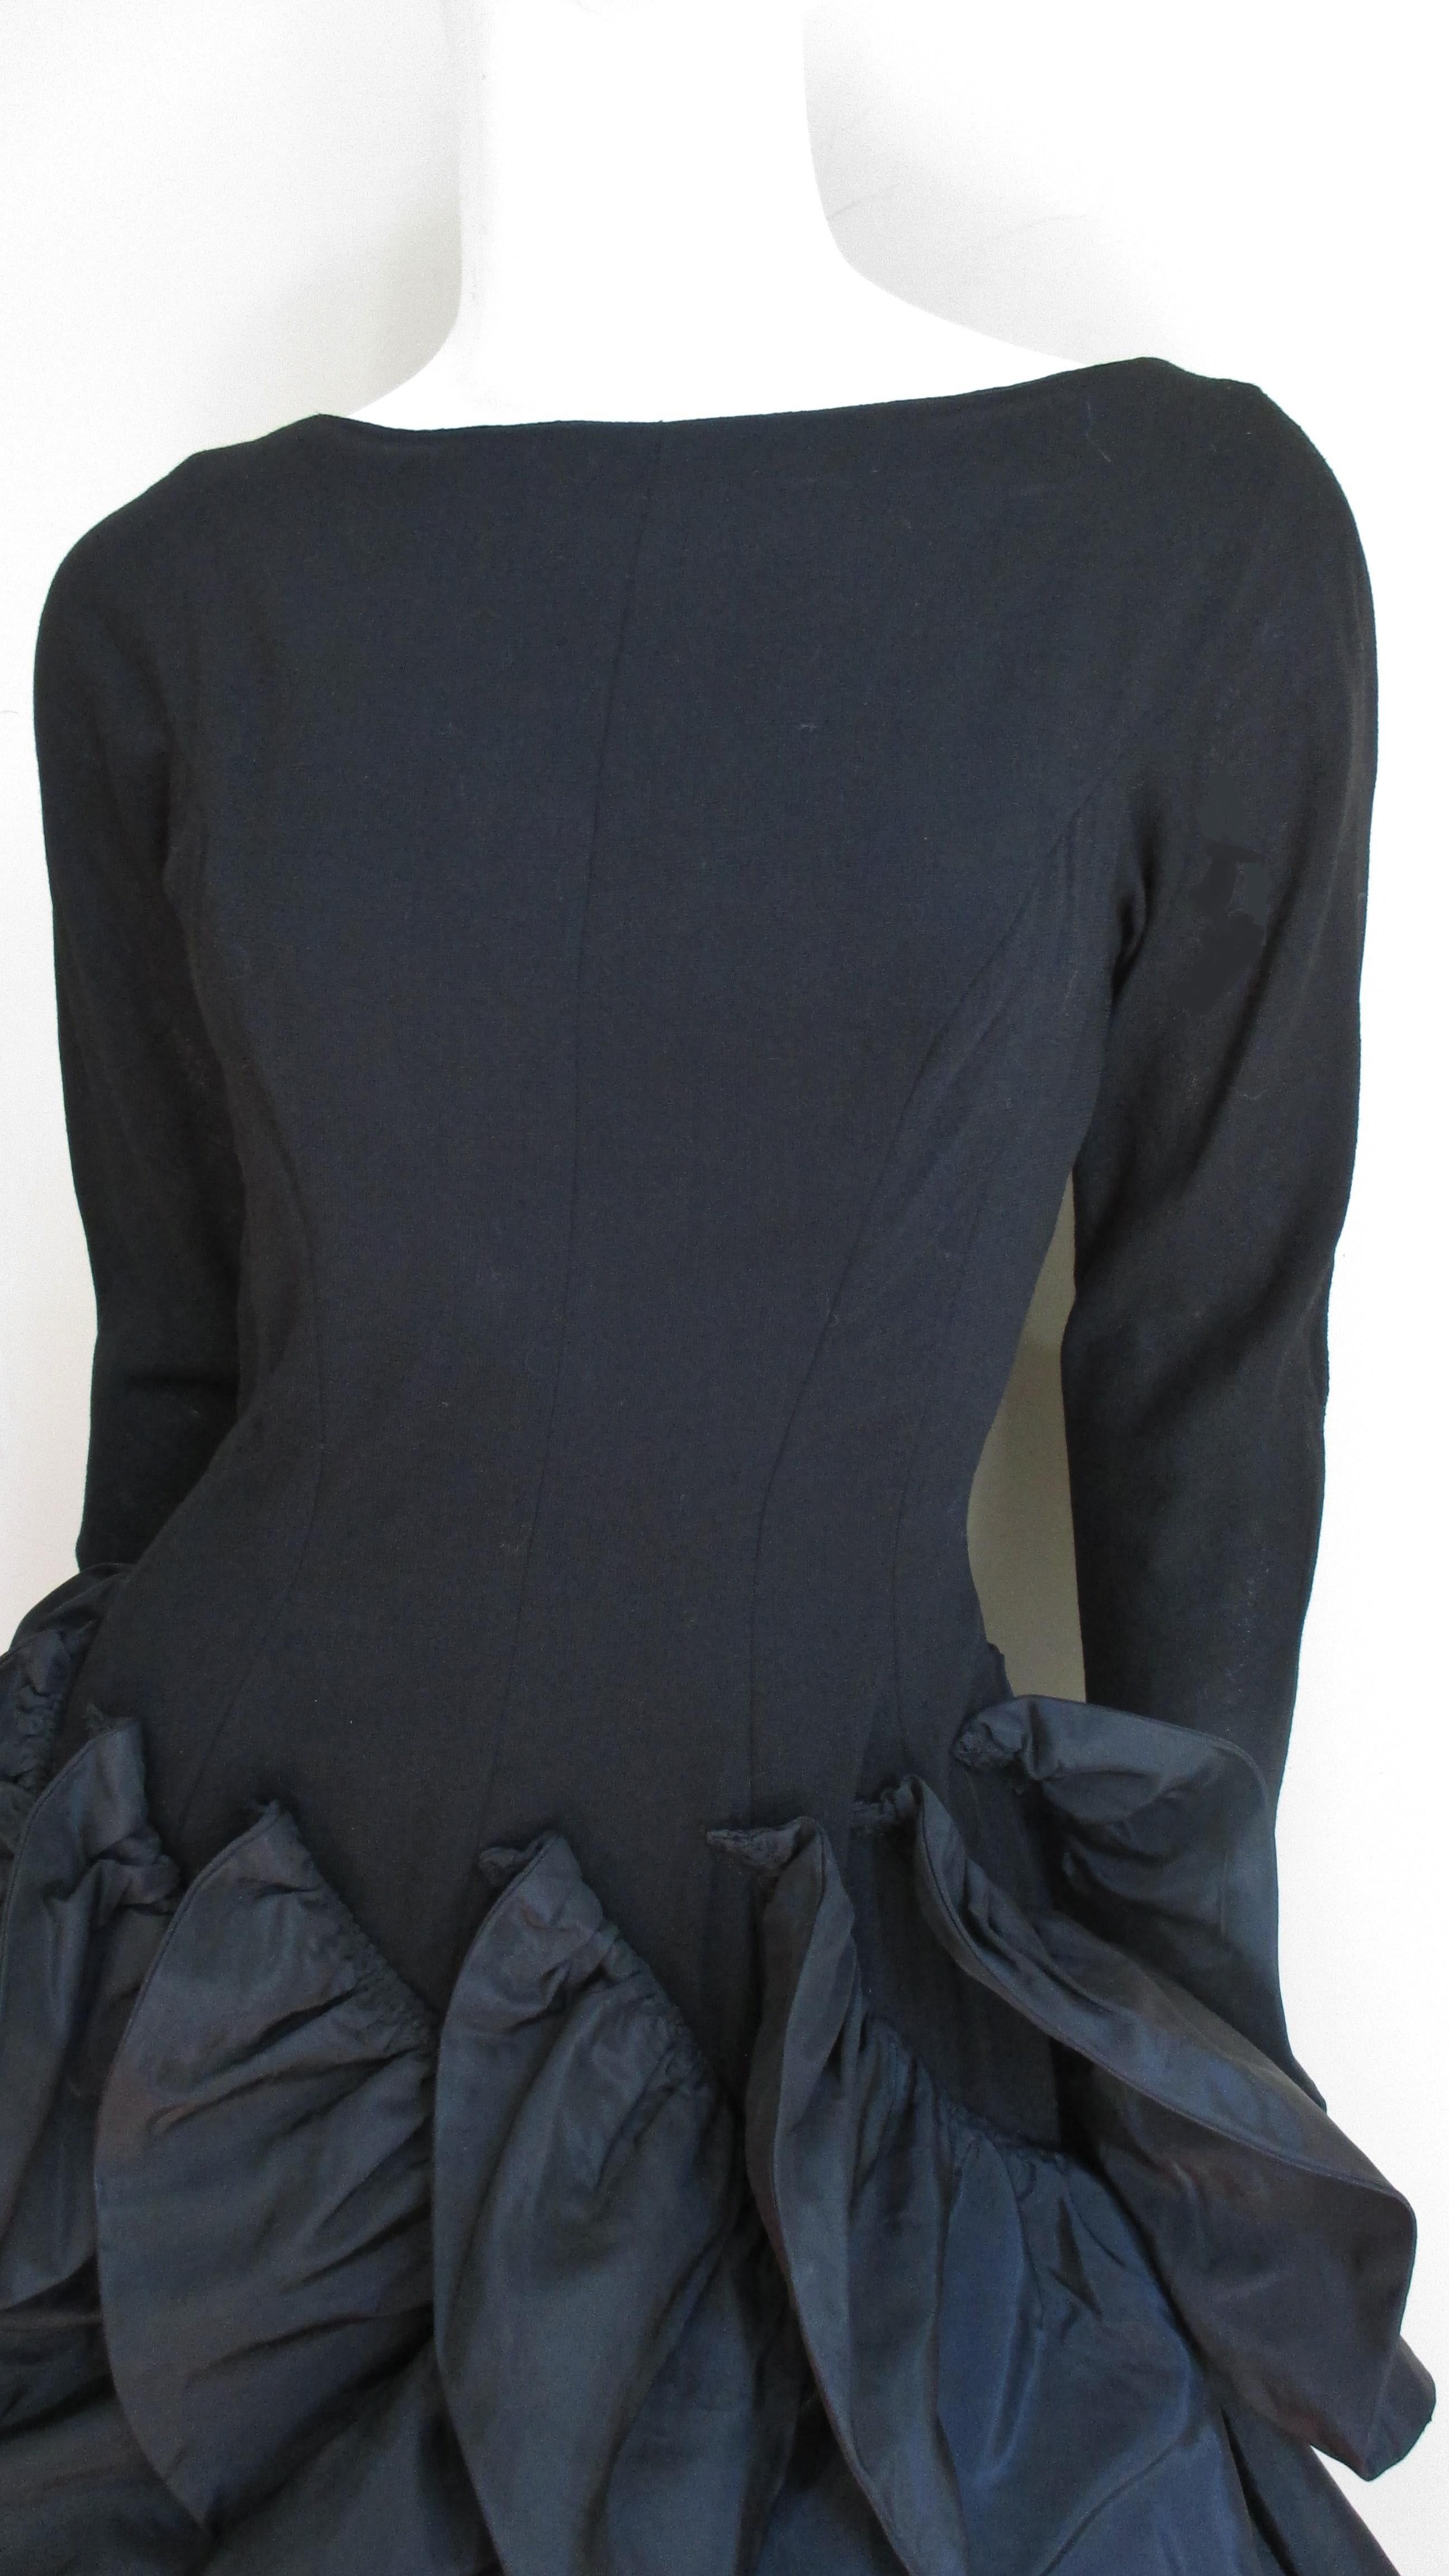 Betty Carol 1950s Sculptural Dress In Good Condition For Sale In Water Mill, NY